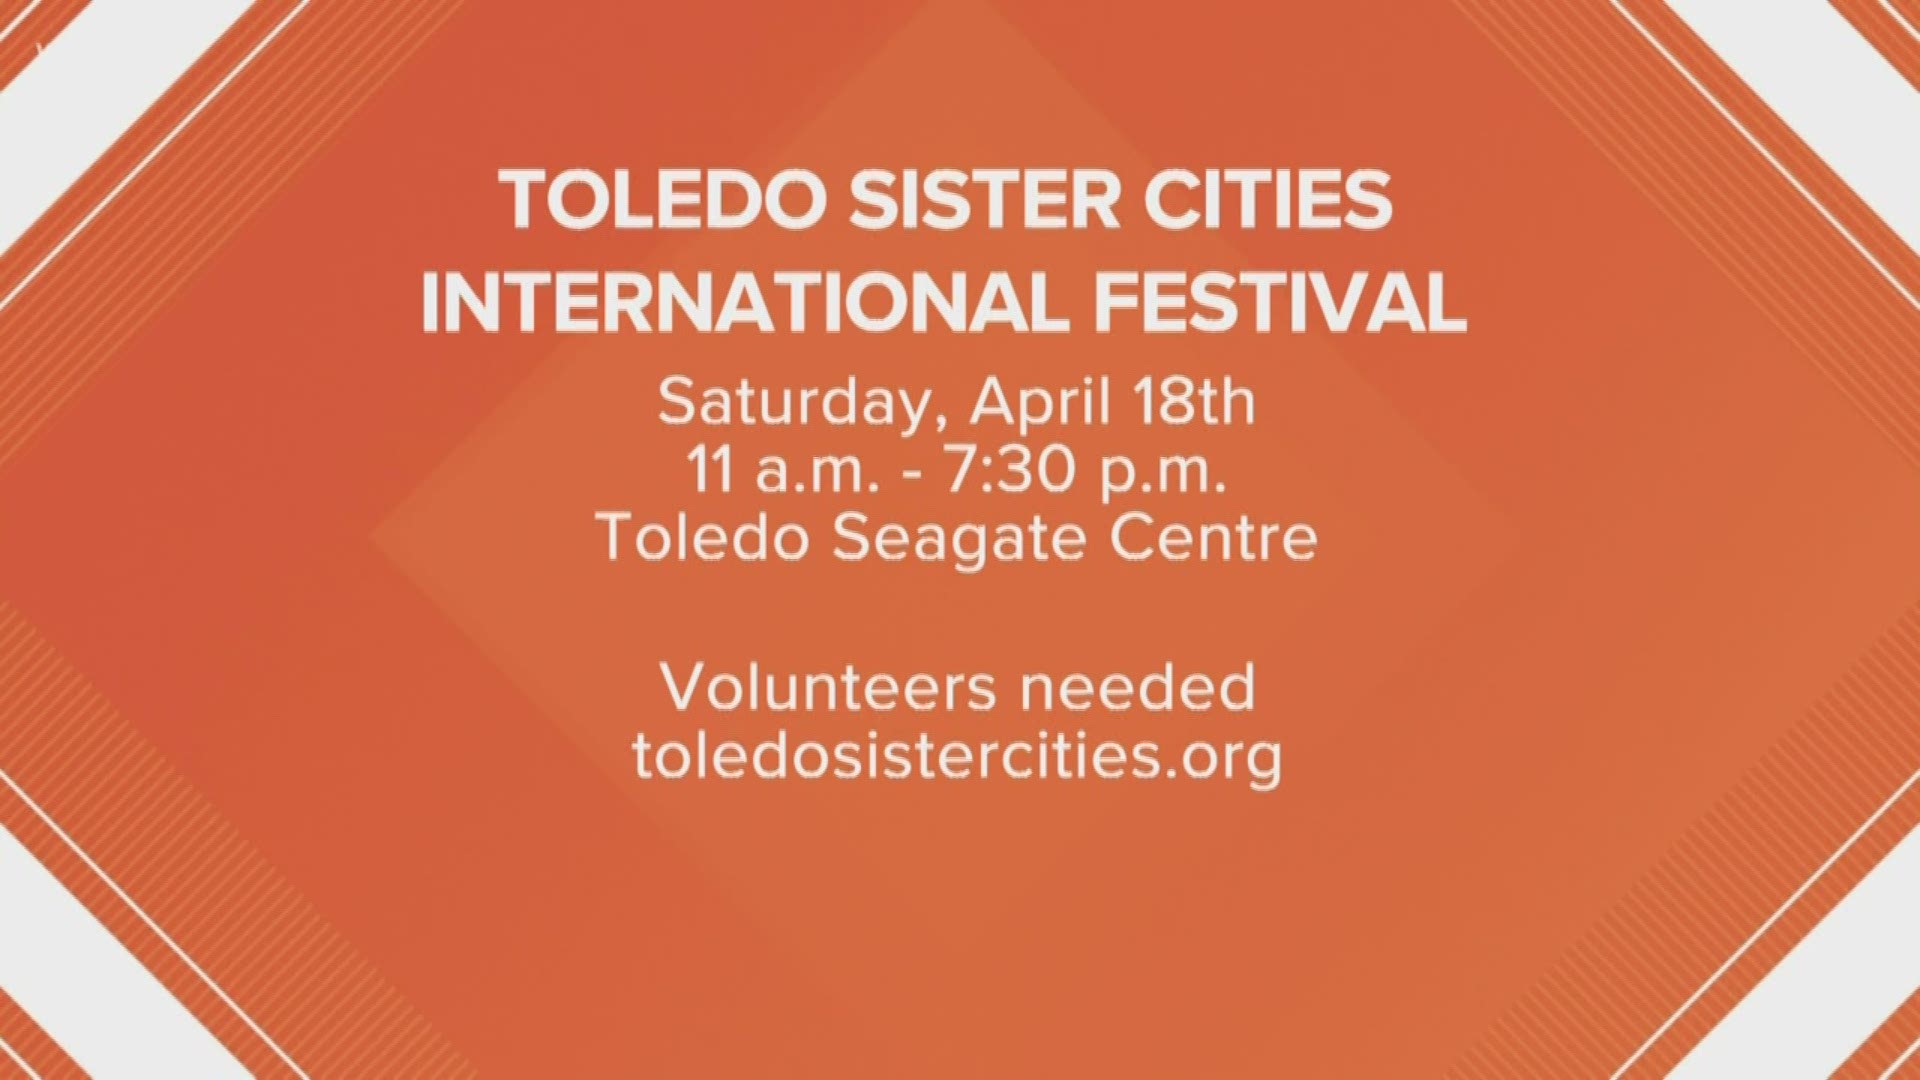 Rogene Kohler and Anwer Ali from Toledo Sister Cities International explain how you can be one of those 'invisible helpers' for April's festival.